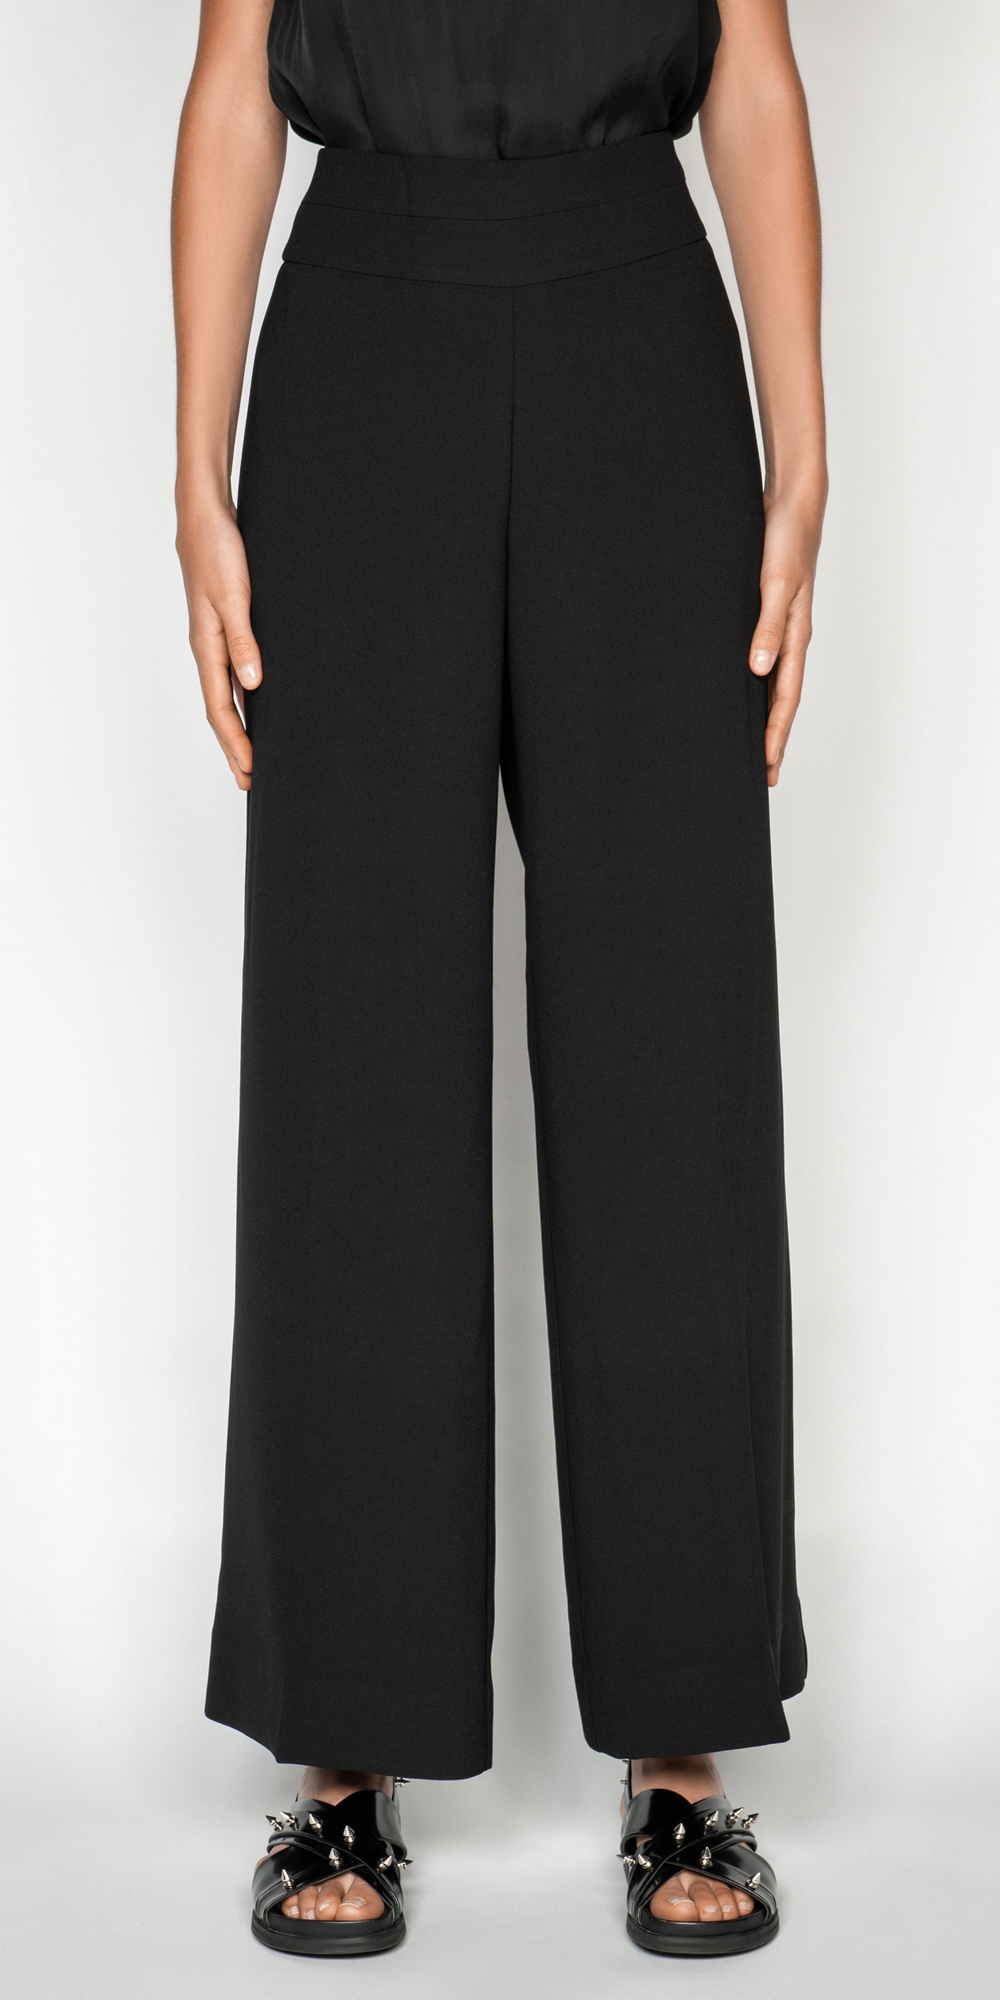 High Waisted Wide Leg Pant | Buy Pants Online - Cue